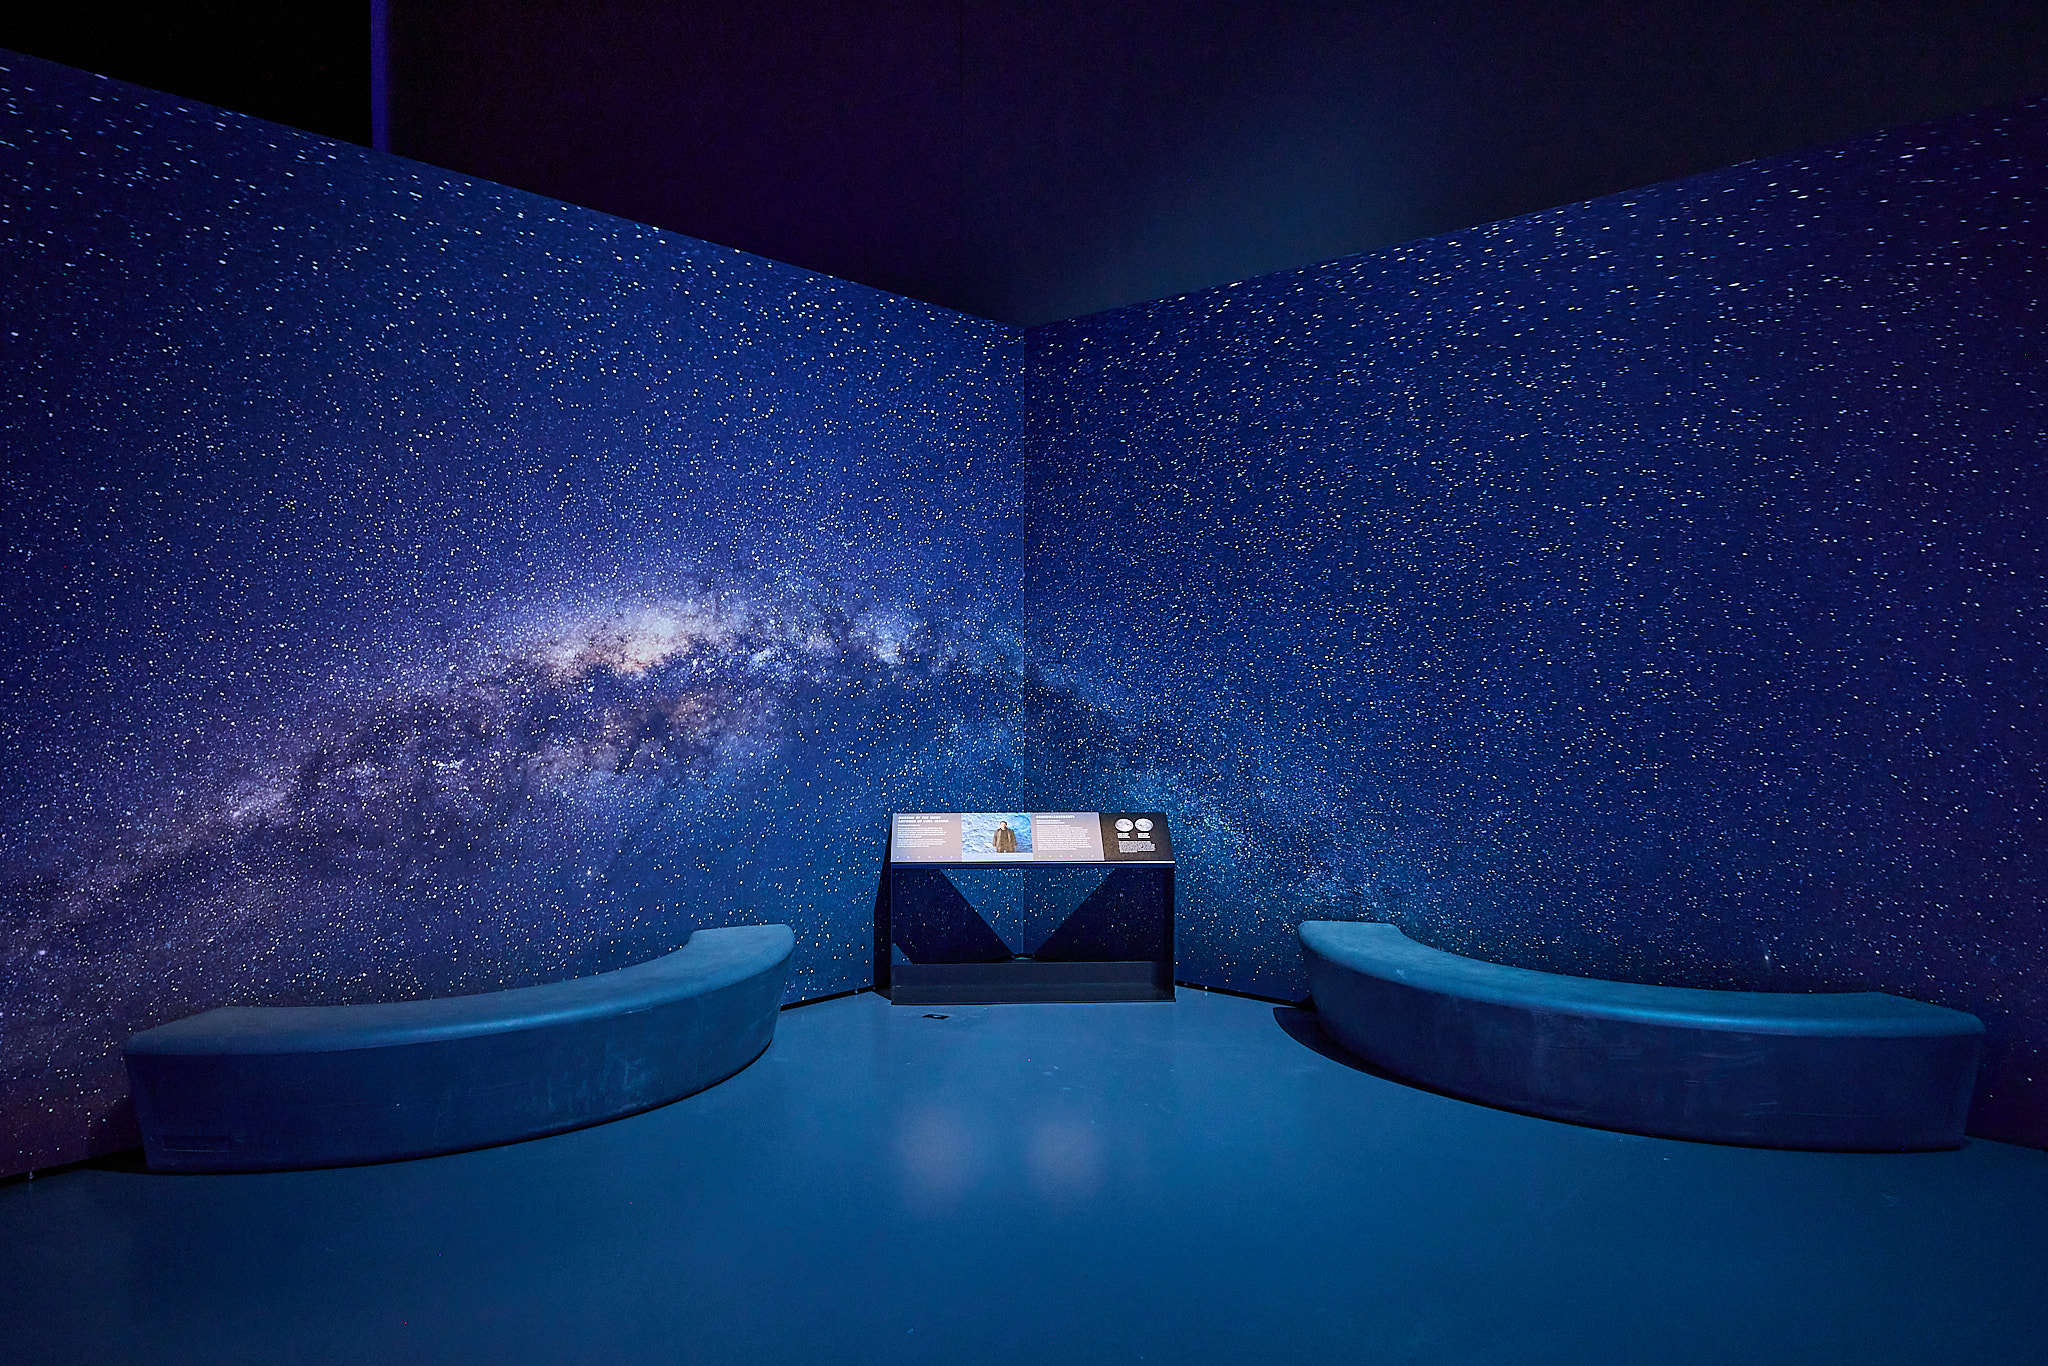 Tranquil space inside the exhibition with a wall and bench with a blue galaxy decal behind it, positions near the large moon installation.